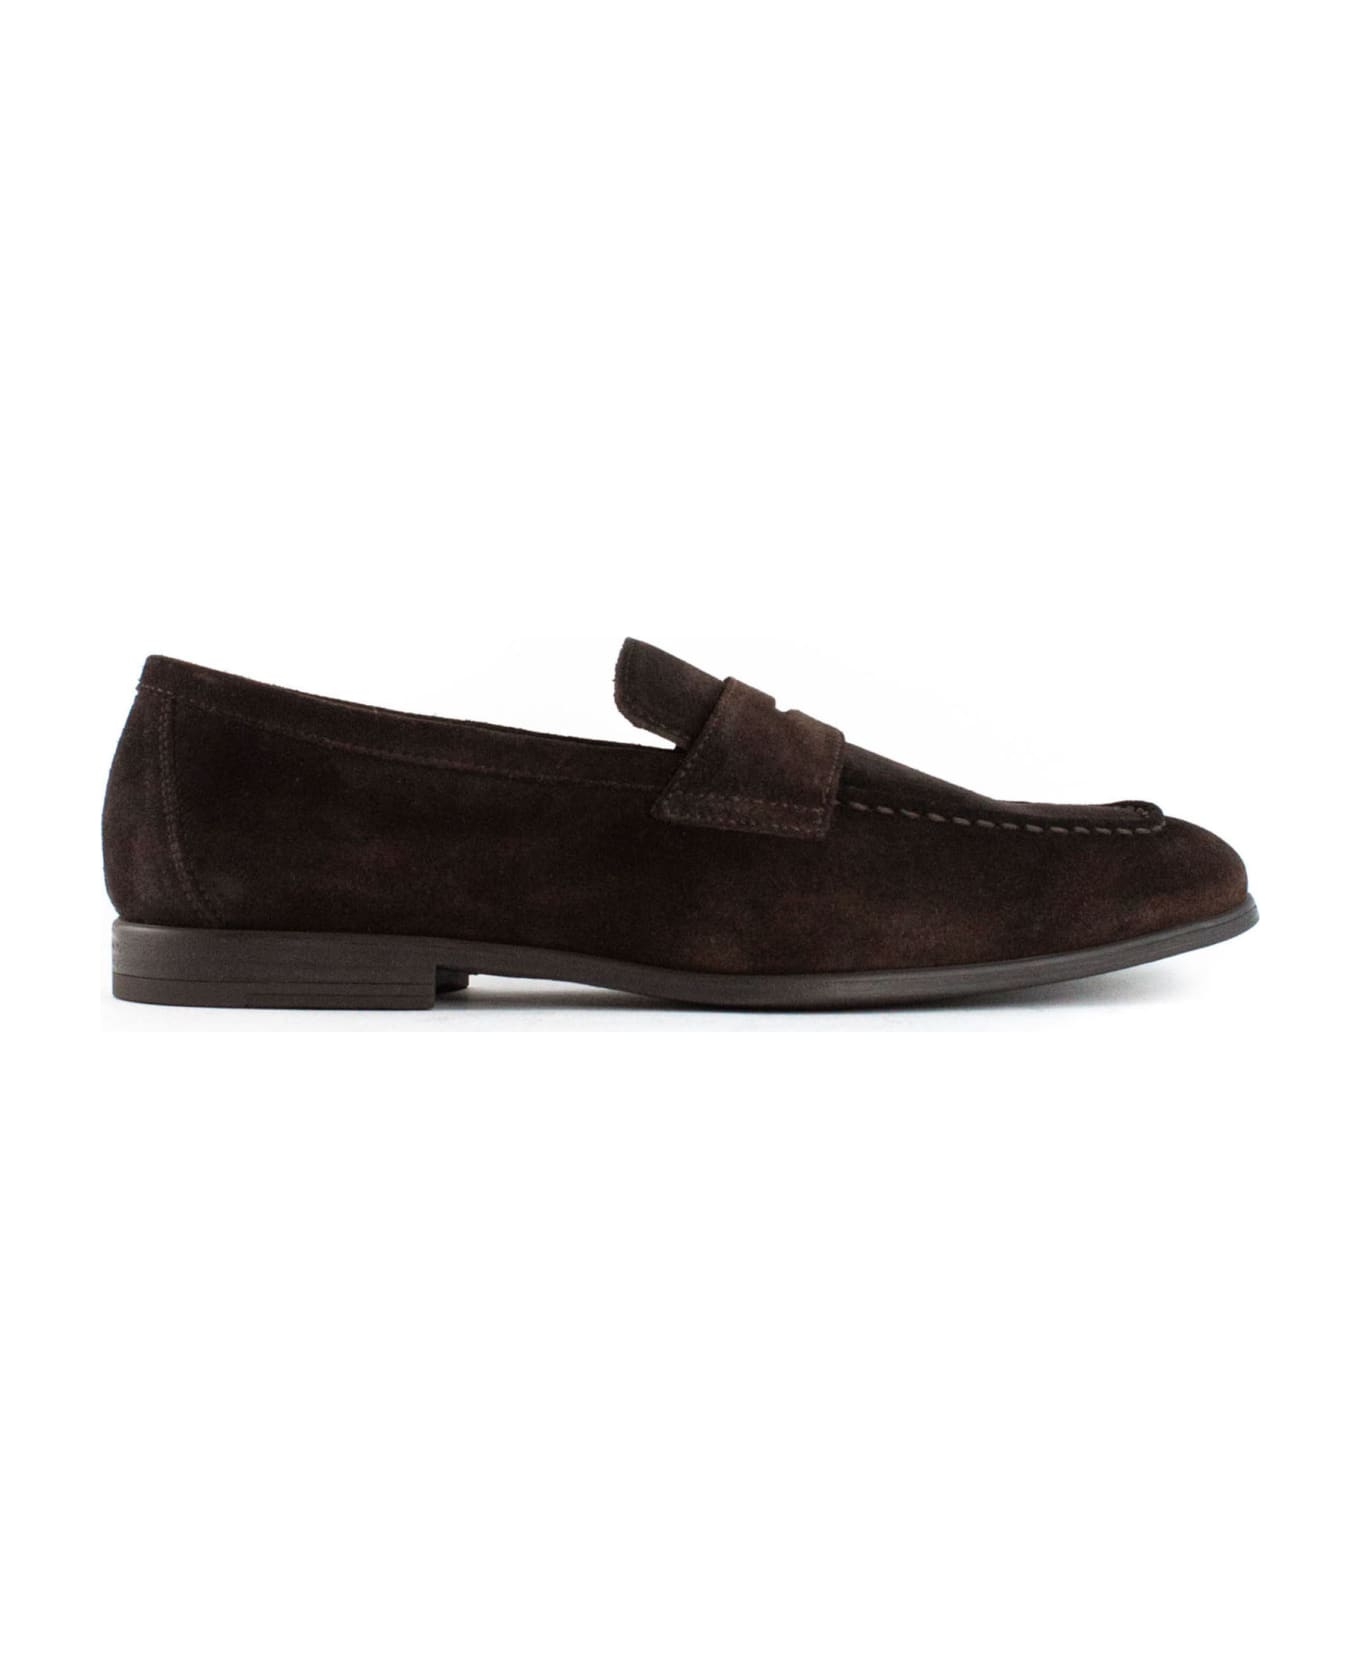 Doucal's Penny Loafer In Brown Suede - Brown